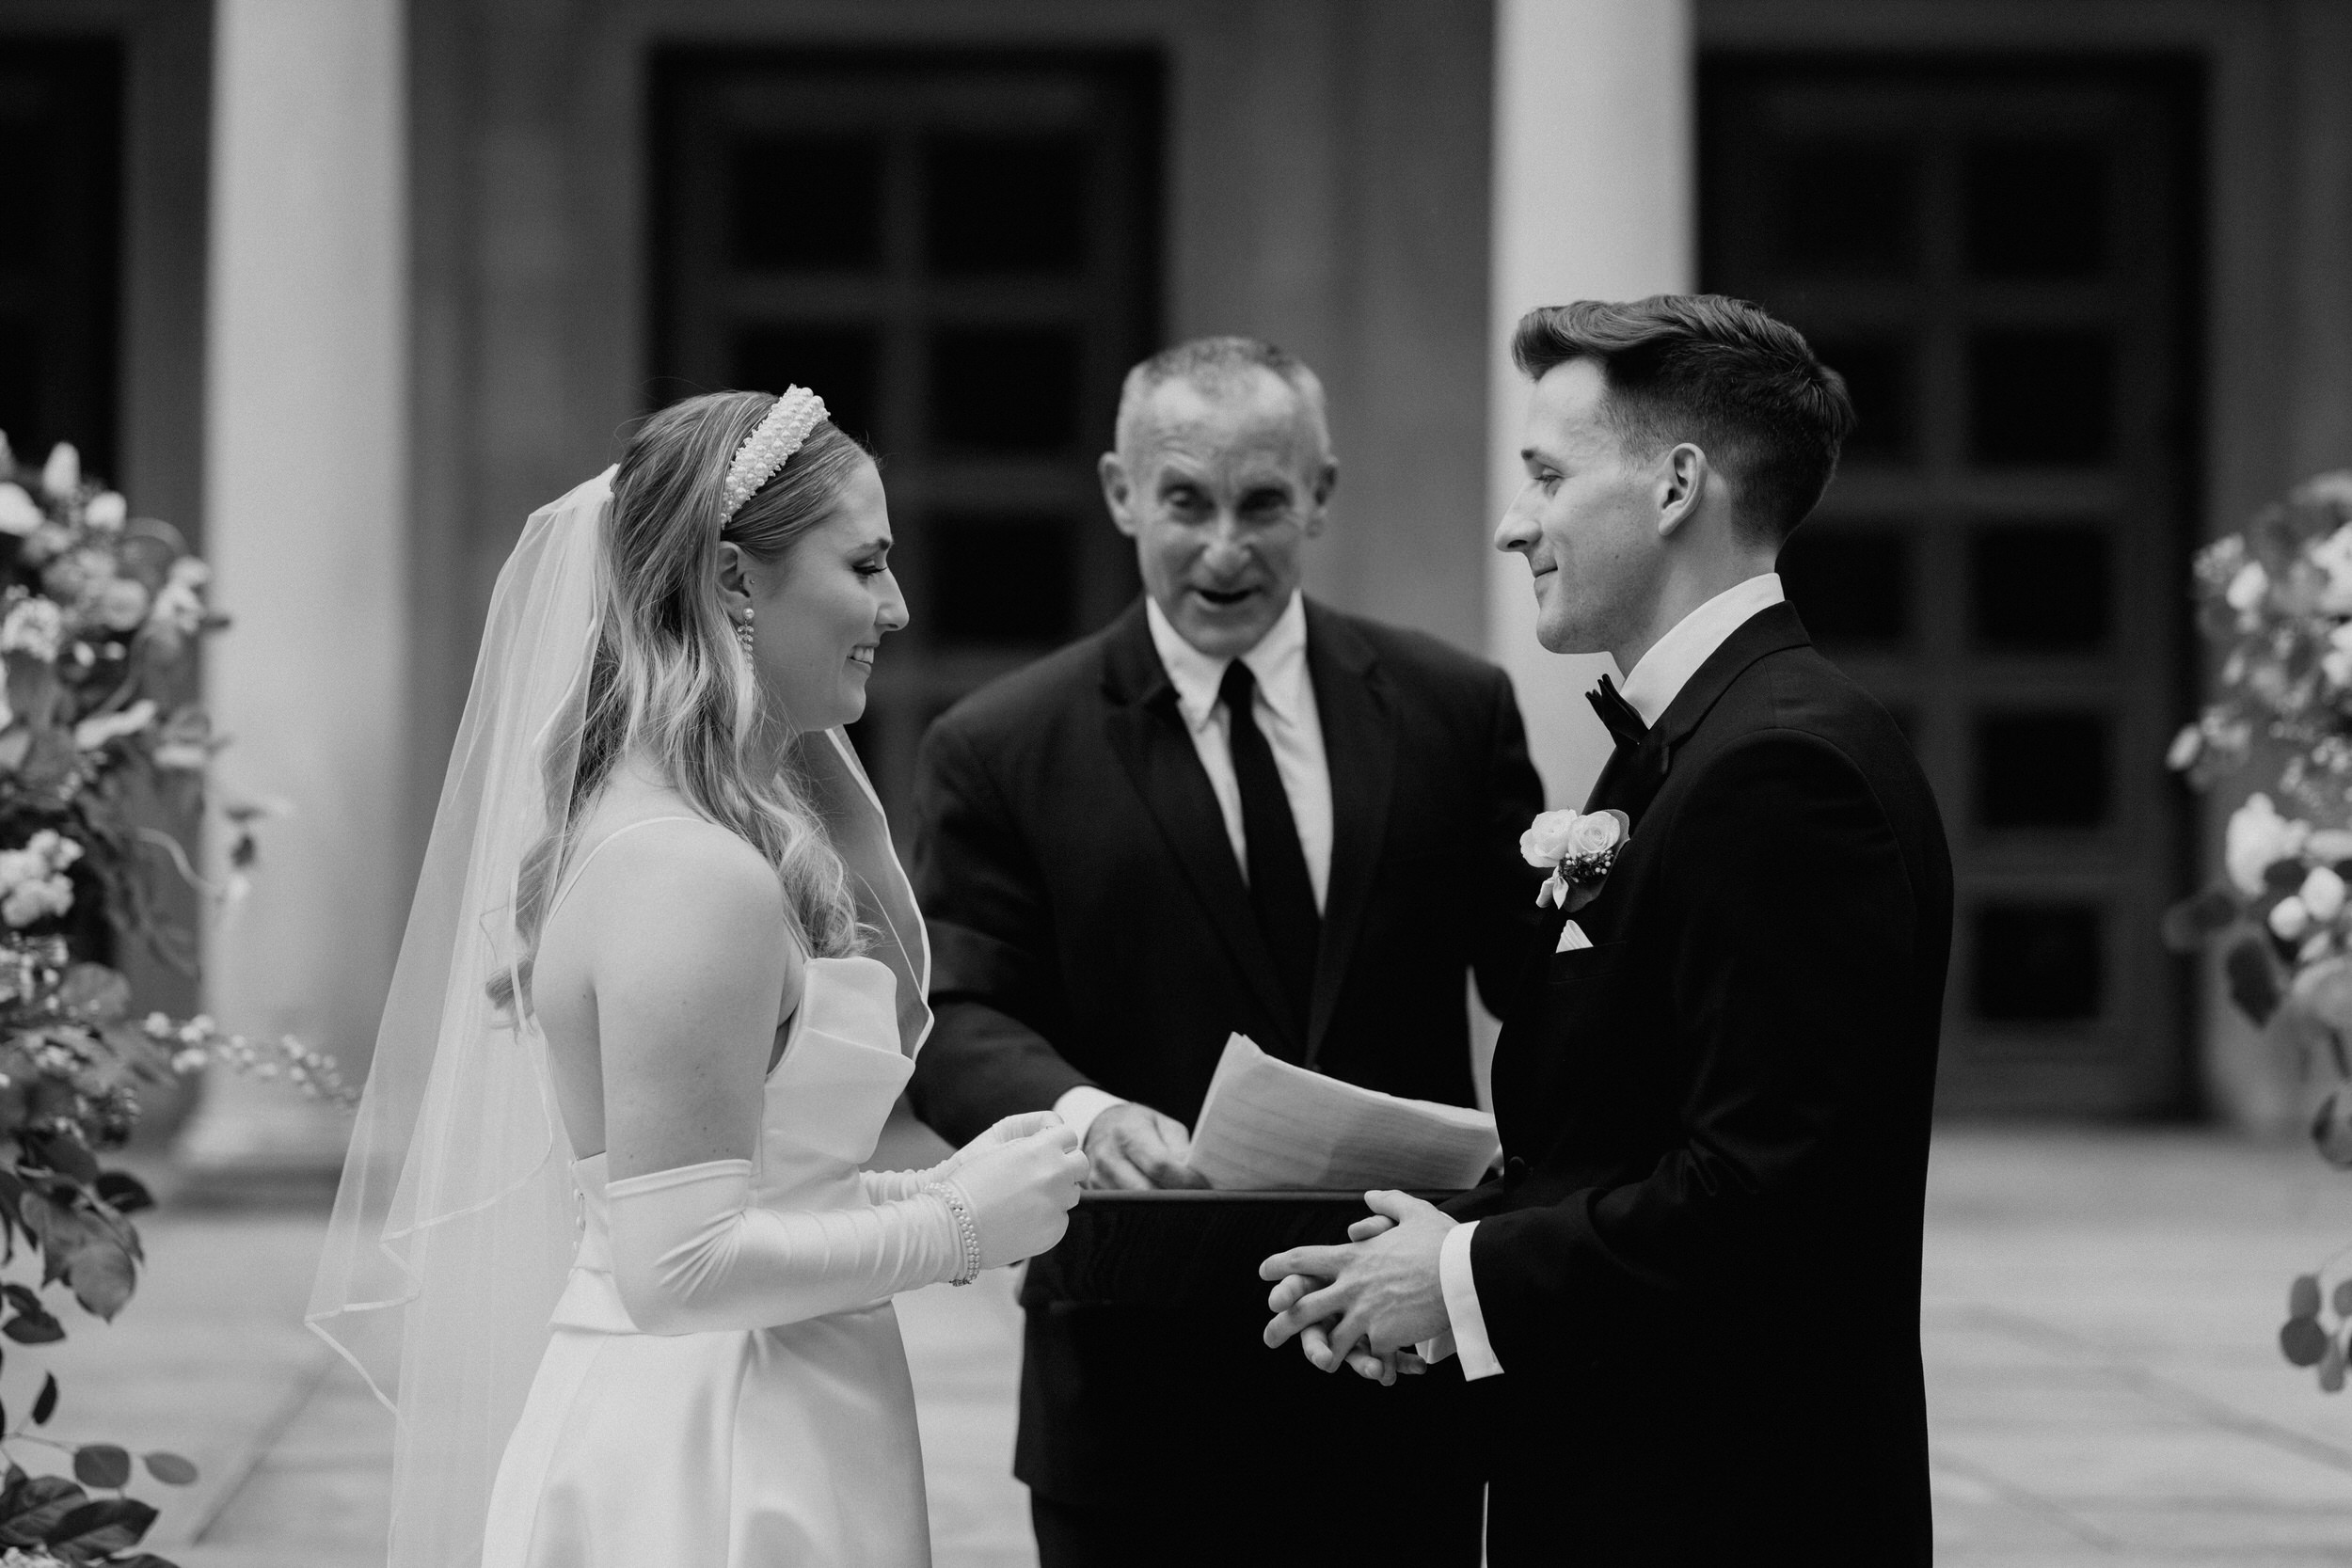 The Frick Pittsburgh wedding ceremony